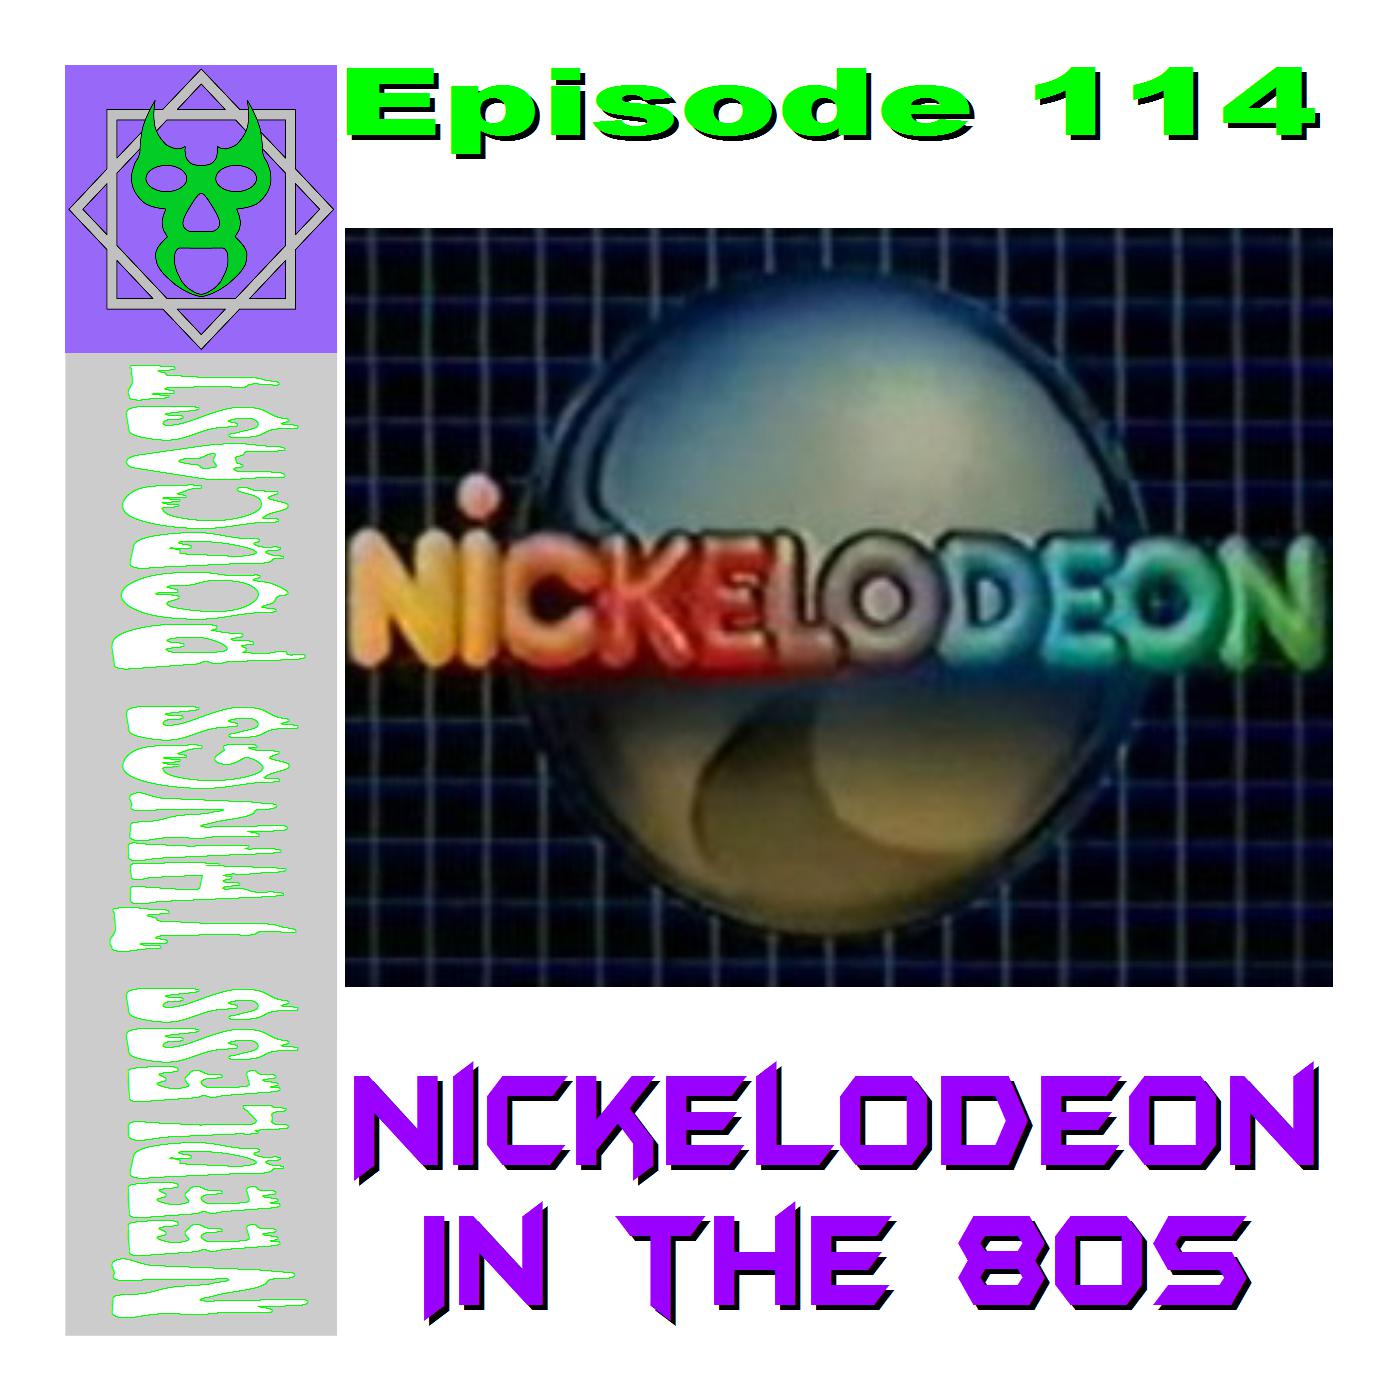 Needless Things Podcast 114 – Nickelodeon in the 80s